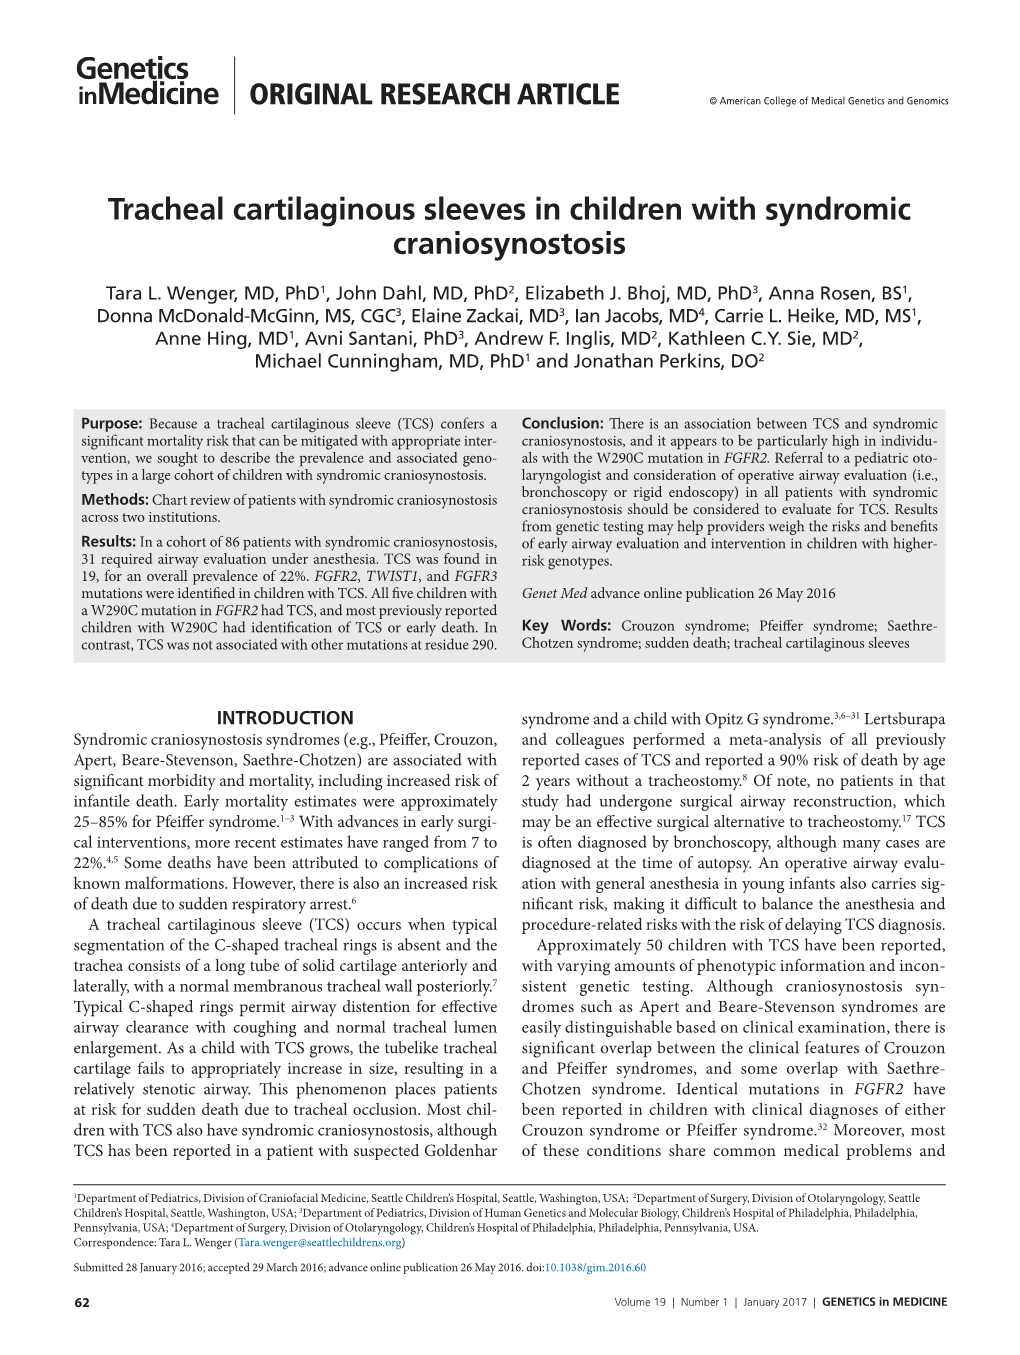 Tracheal Cartilaginous Sleeves in Children with Syndromic Craniosynostosis